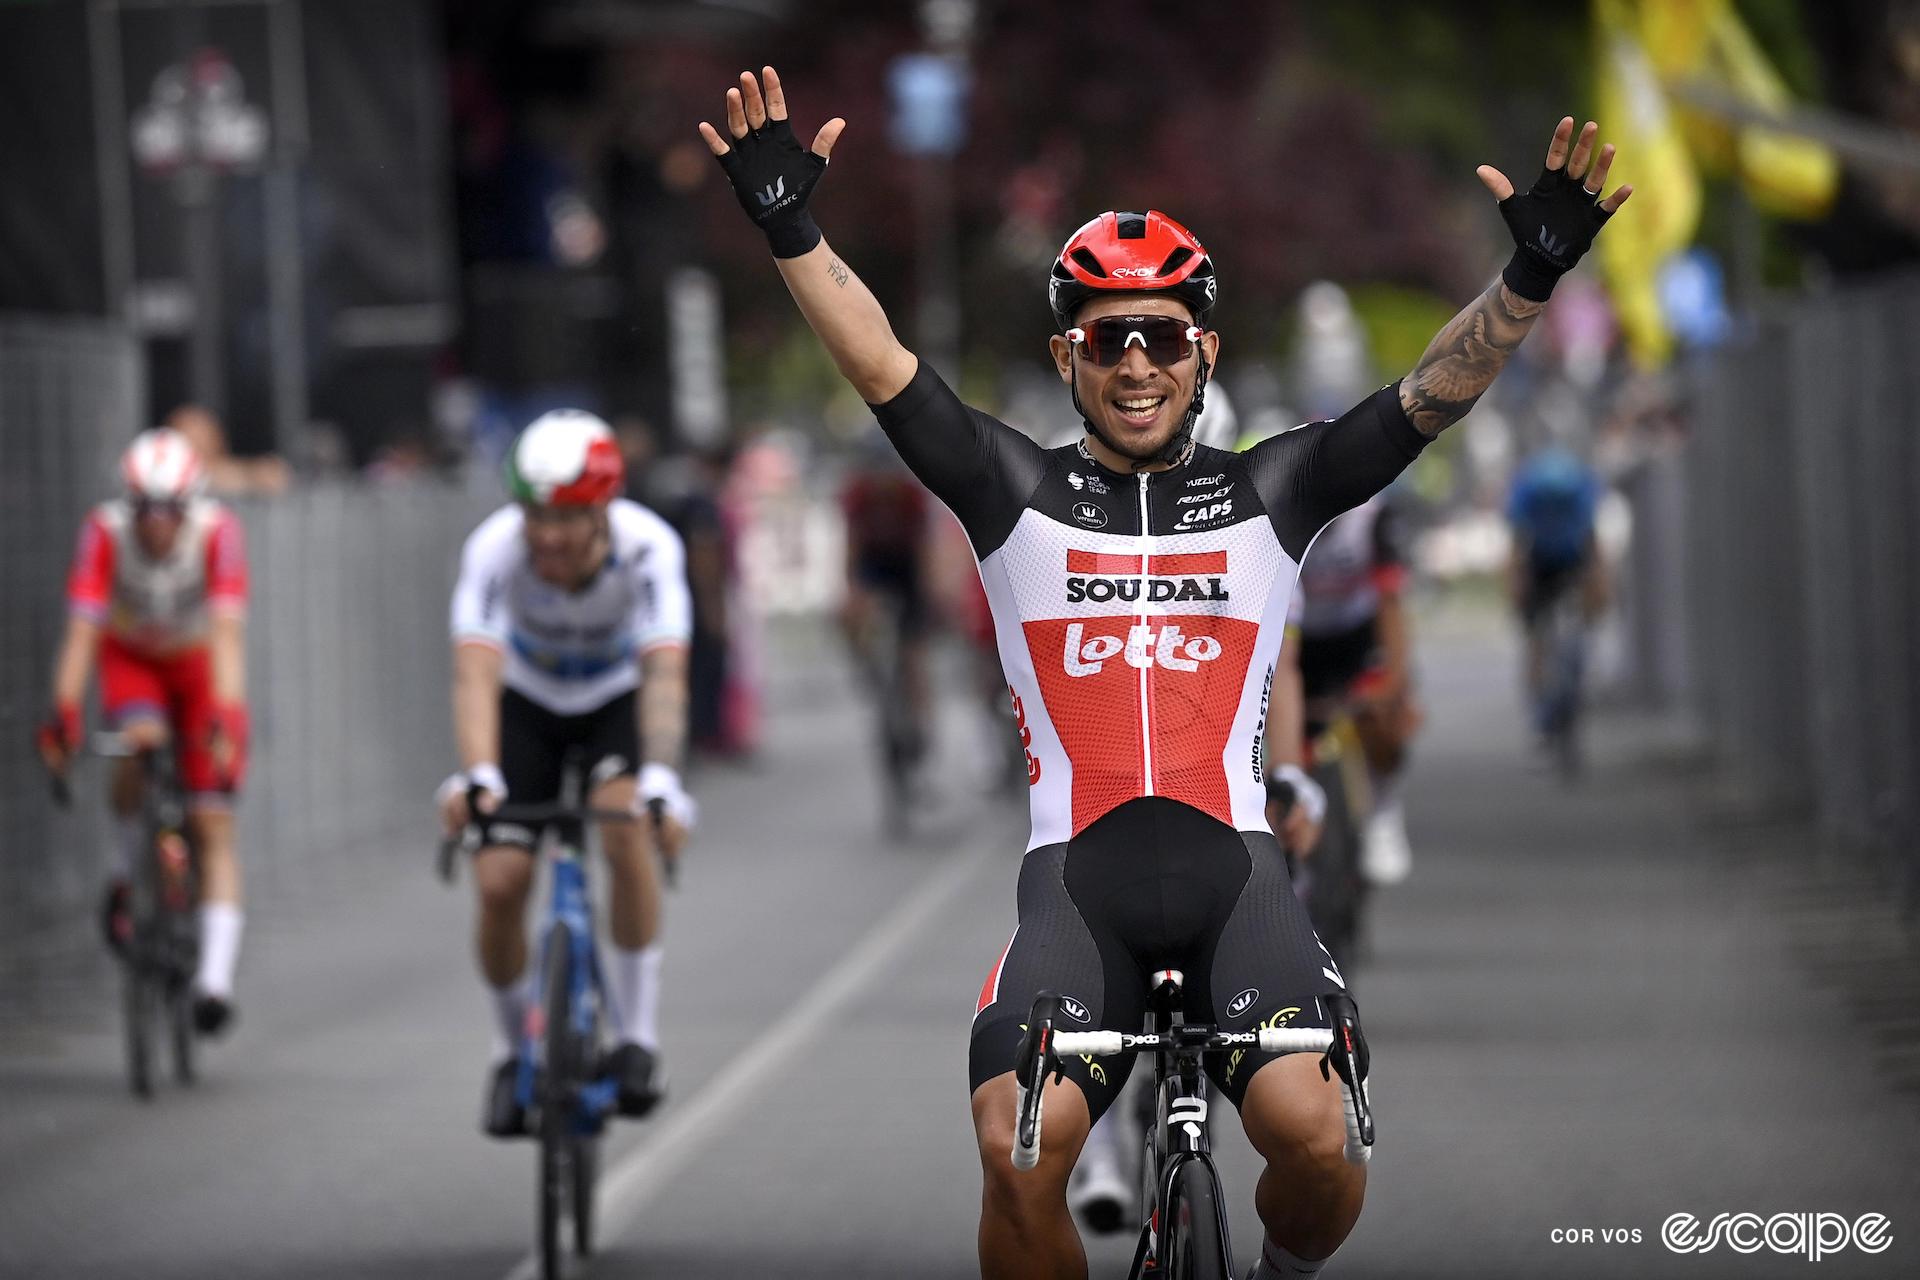 Caleb Ewan celebrates winning a Giro stage with two hands in the air.